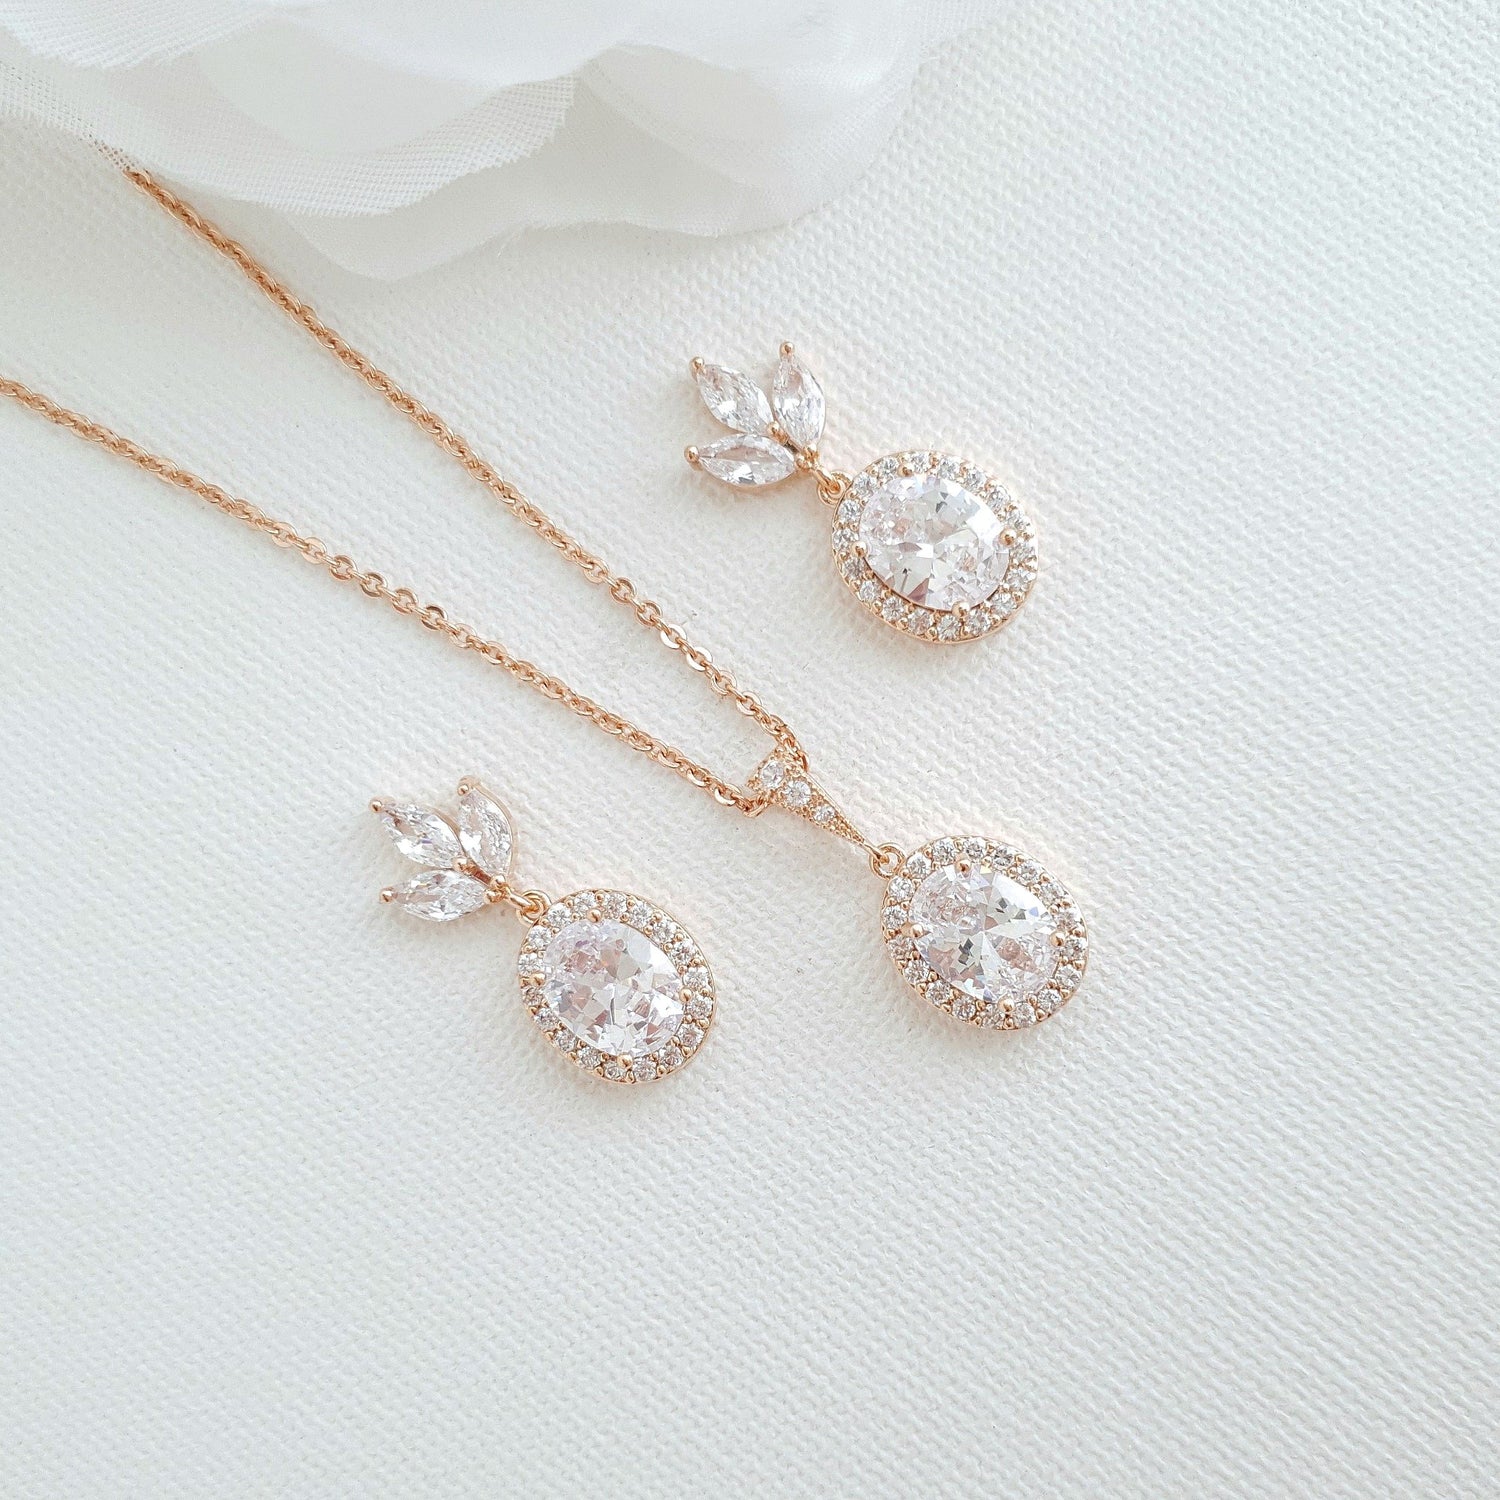 Oval Bridal Jewelry Set-Emily - PoetryDesigns